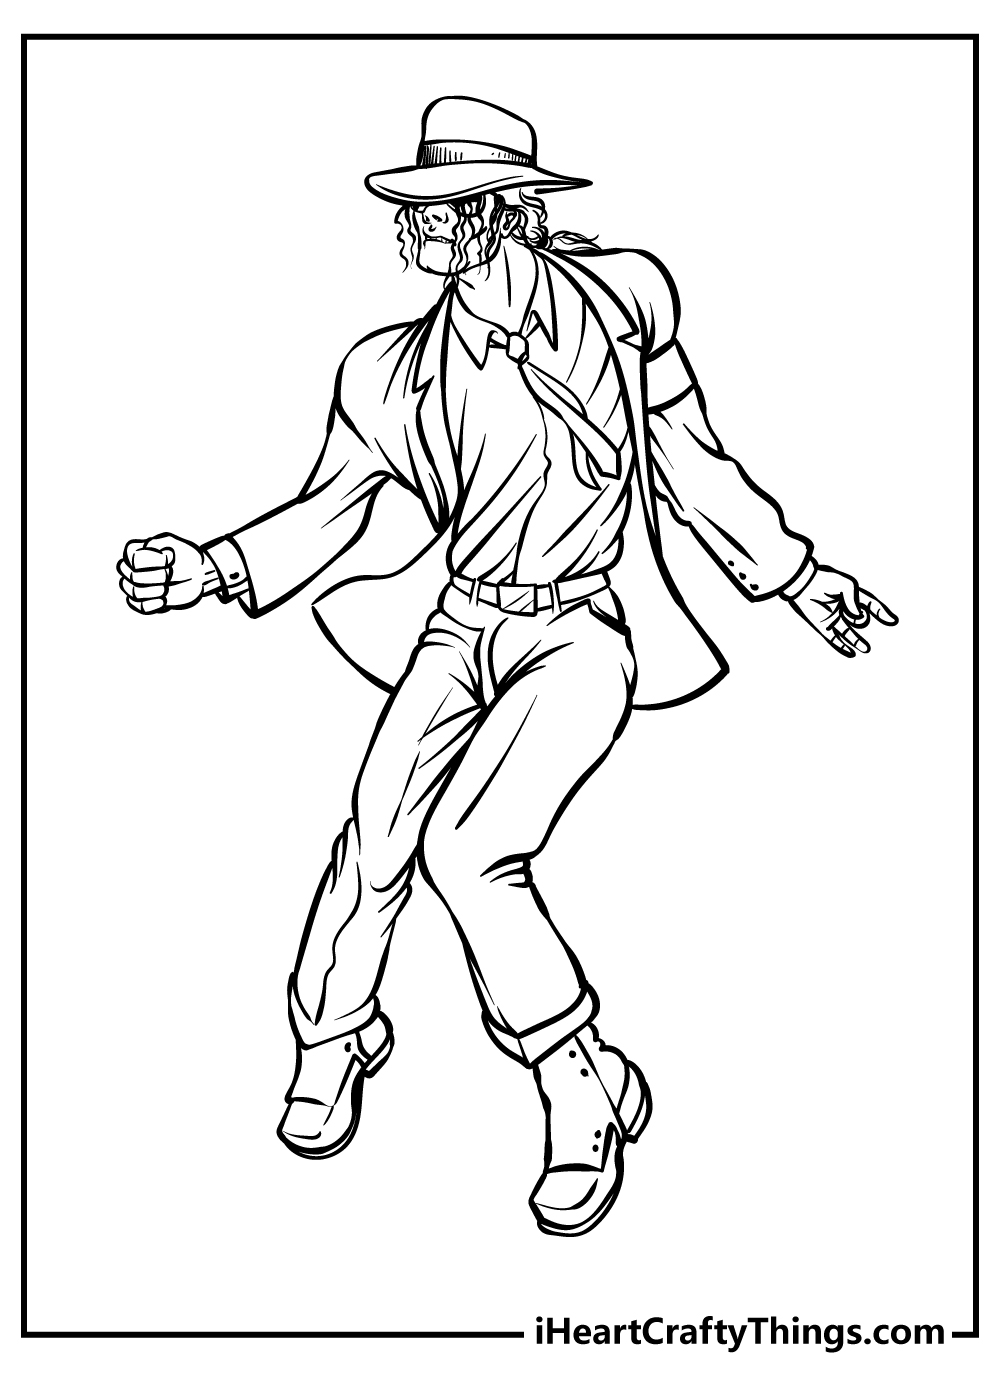 Michael Jackson Coloring Pages for adults free printable